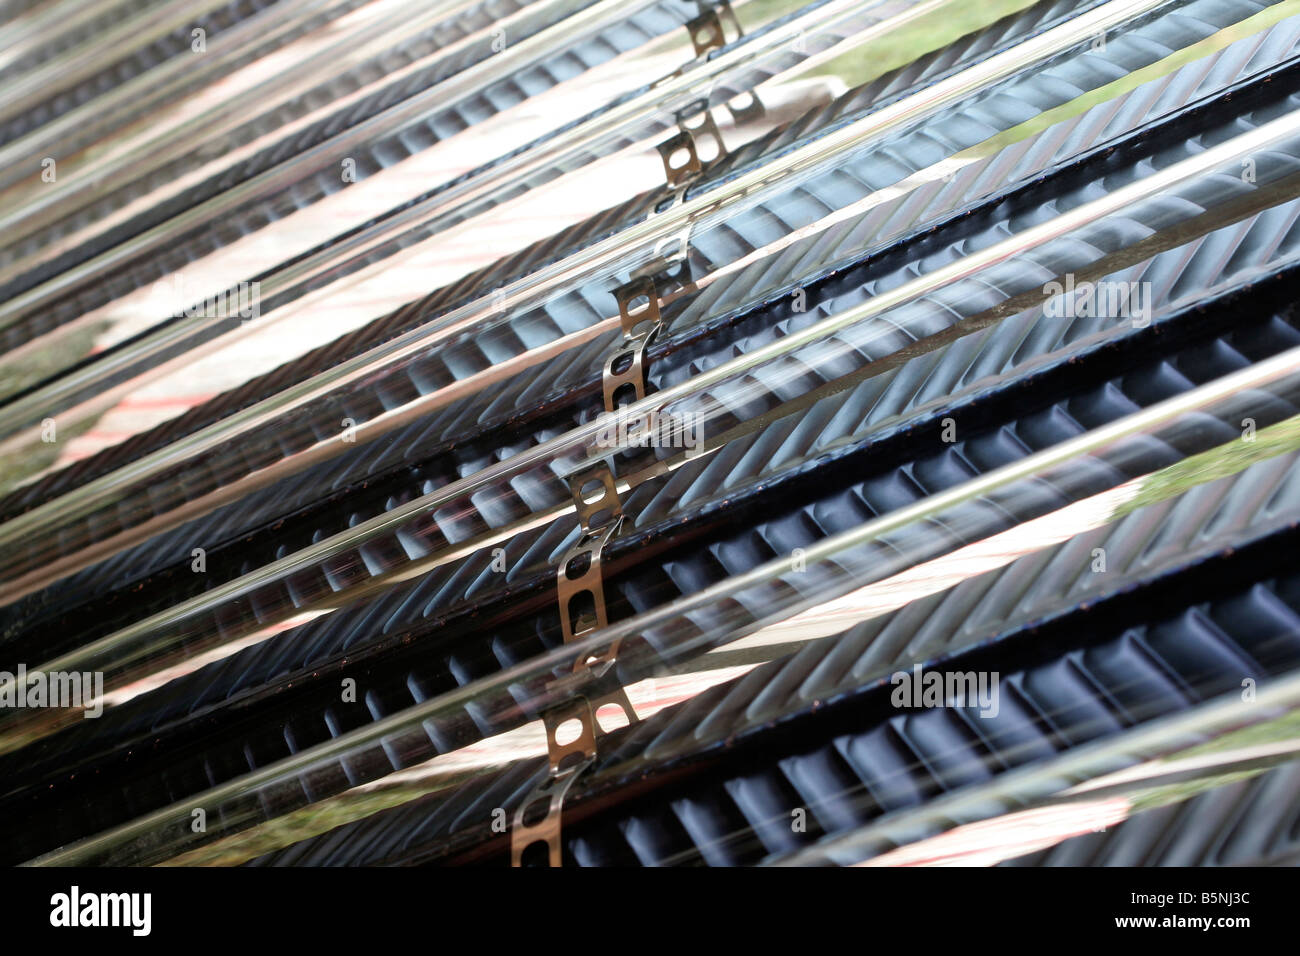 Tube type hot water solar collector Stock Photo